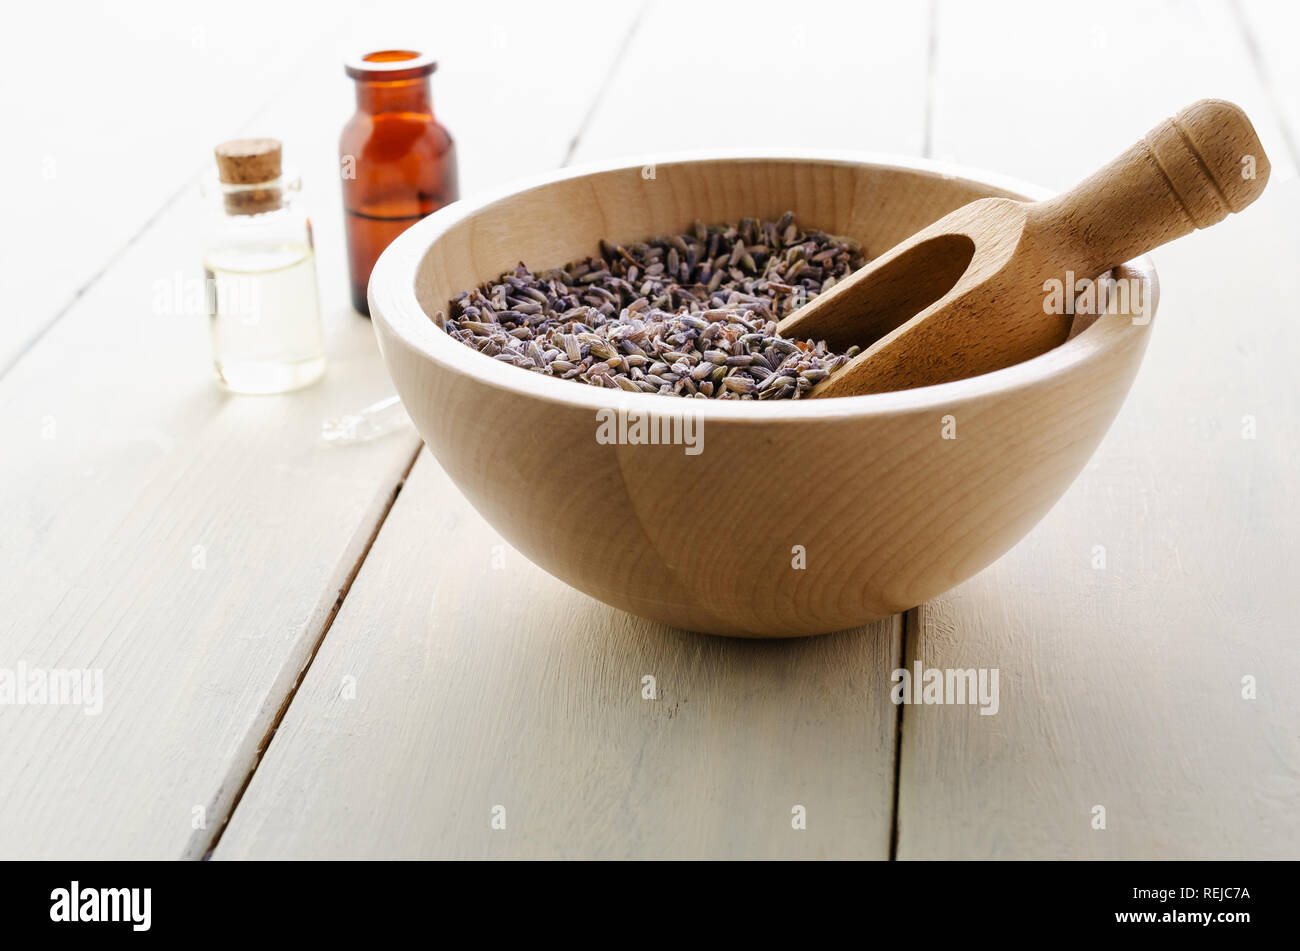 Herbal Lavender flower buds fill a wooden bowl with scoop in front of glass vials containing oils with pipette on white painted wood plank table. Stock Photo